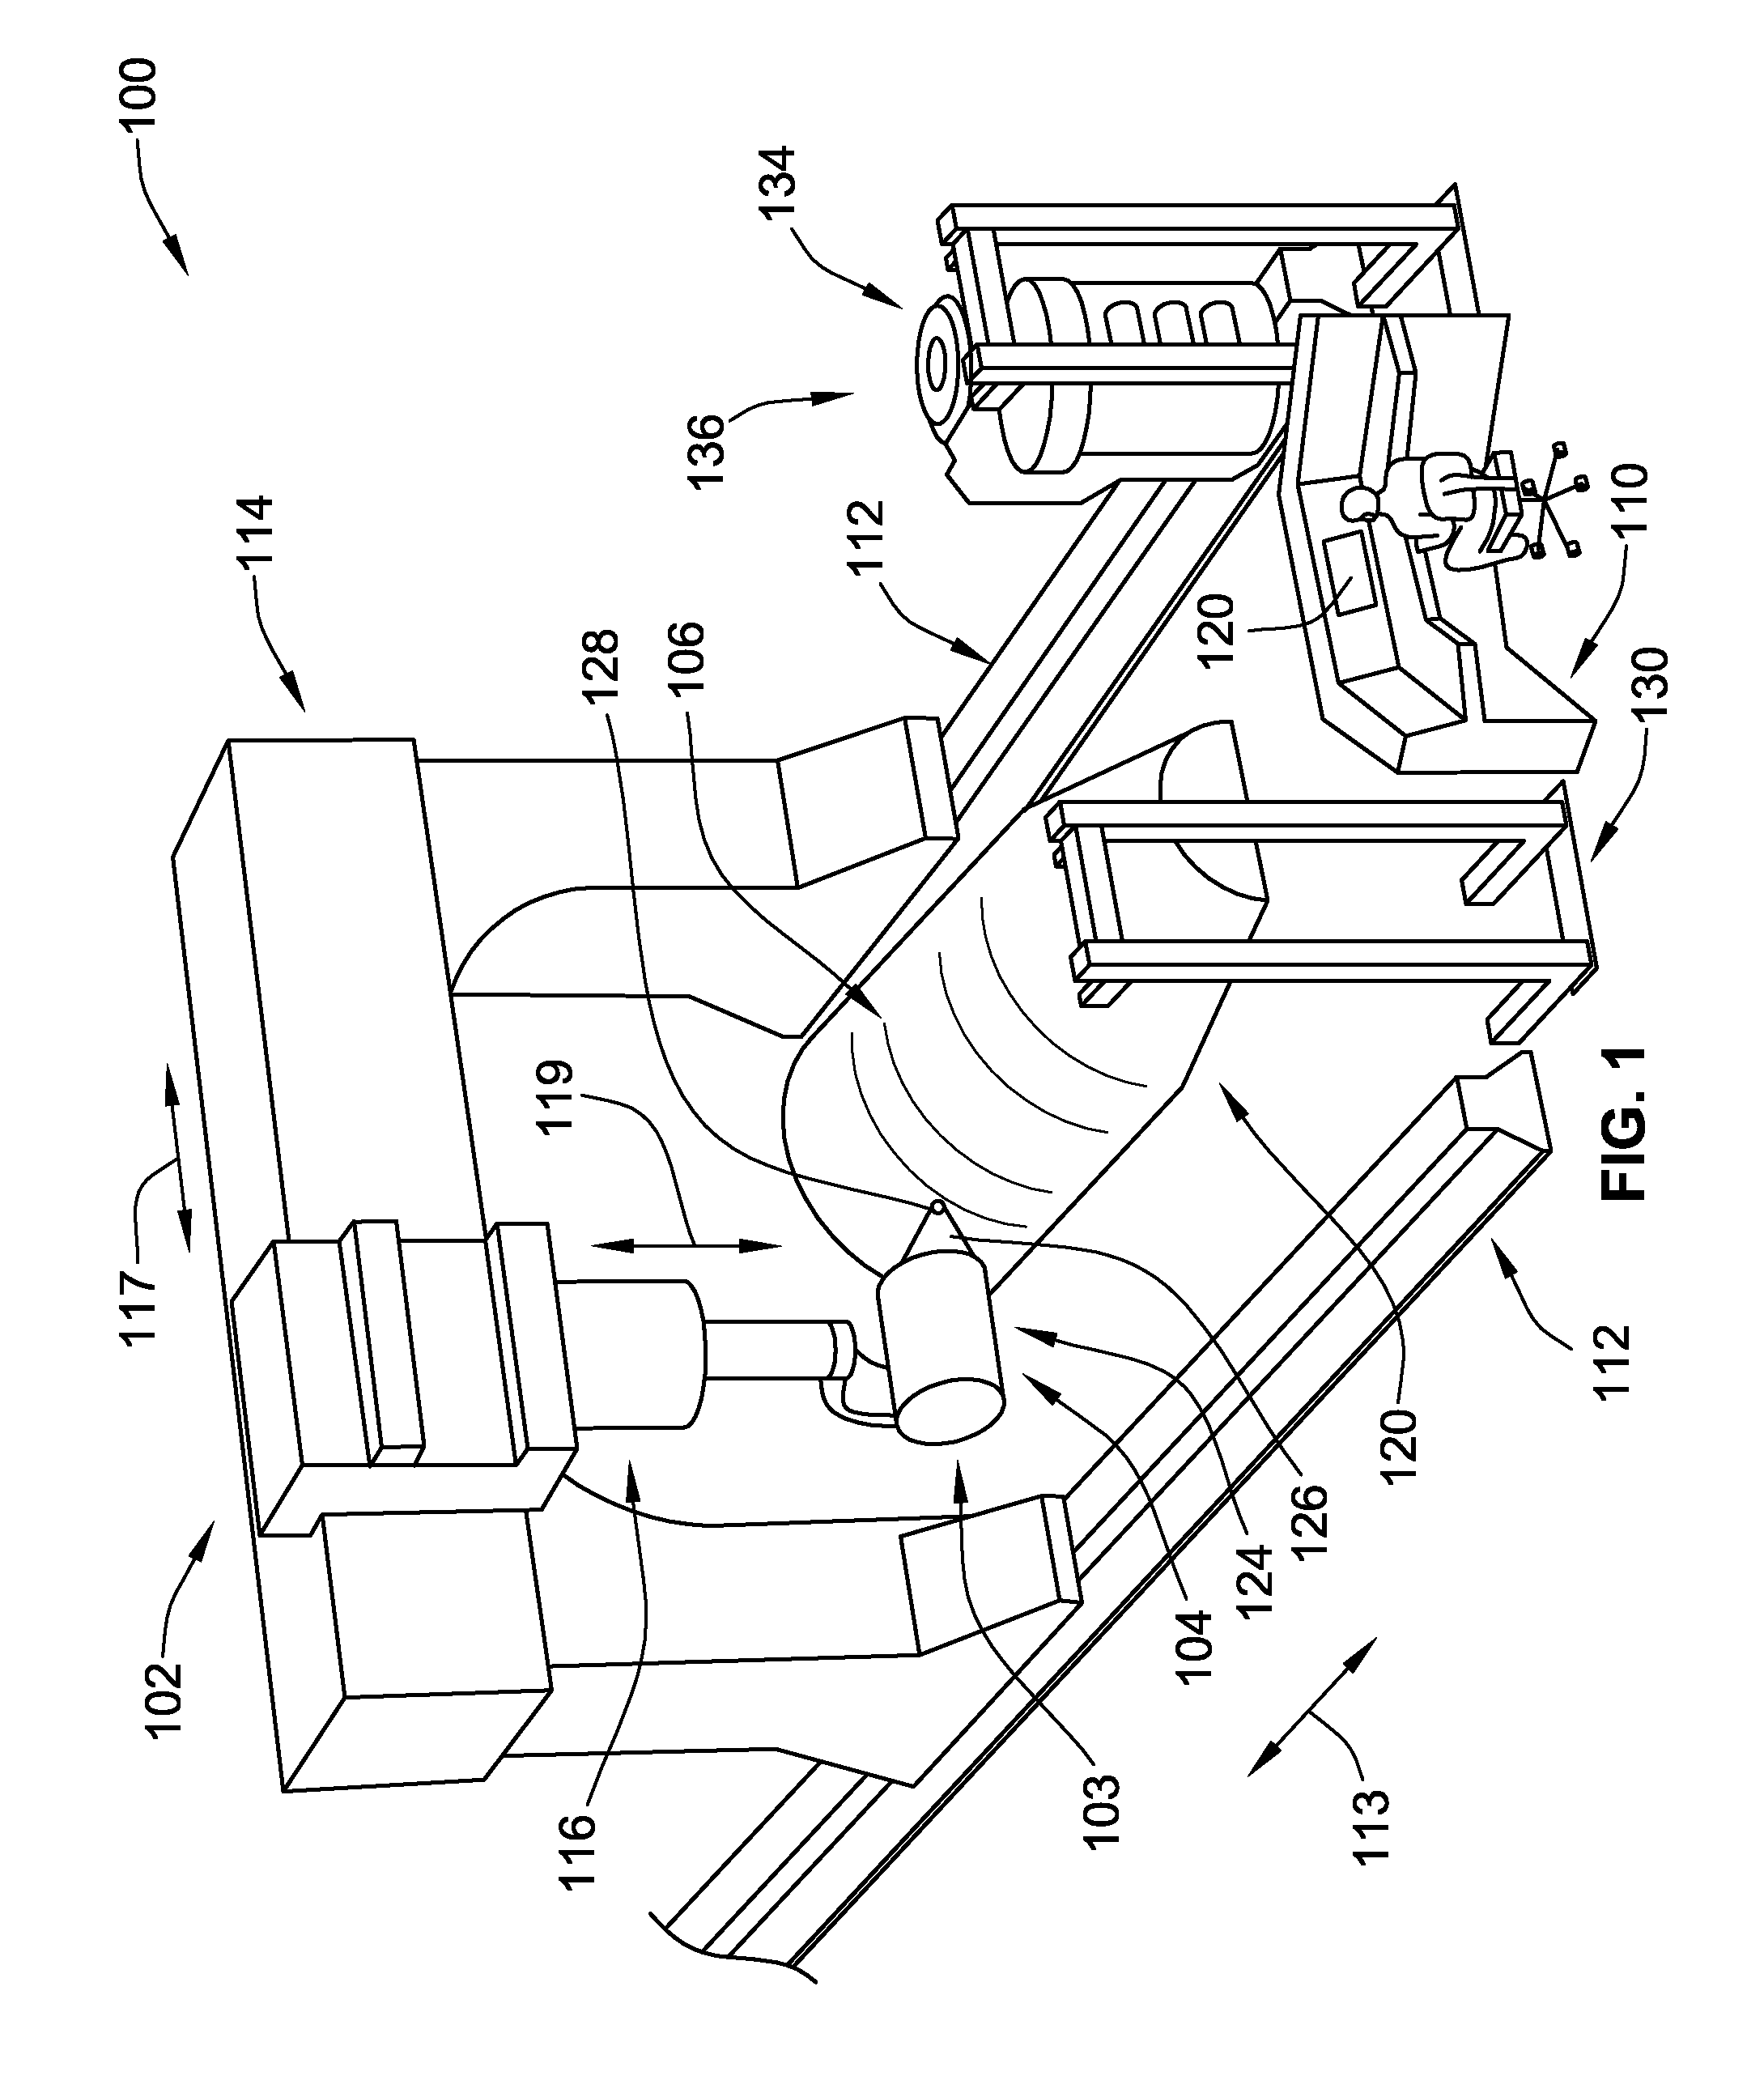 Fiber delivery apparatus and system having a creel and fiber placement head sans fiber redirect